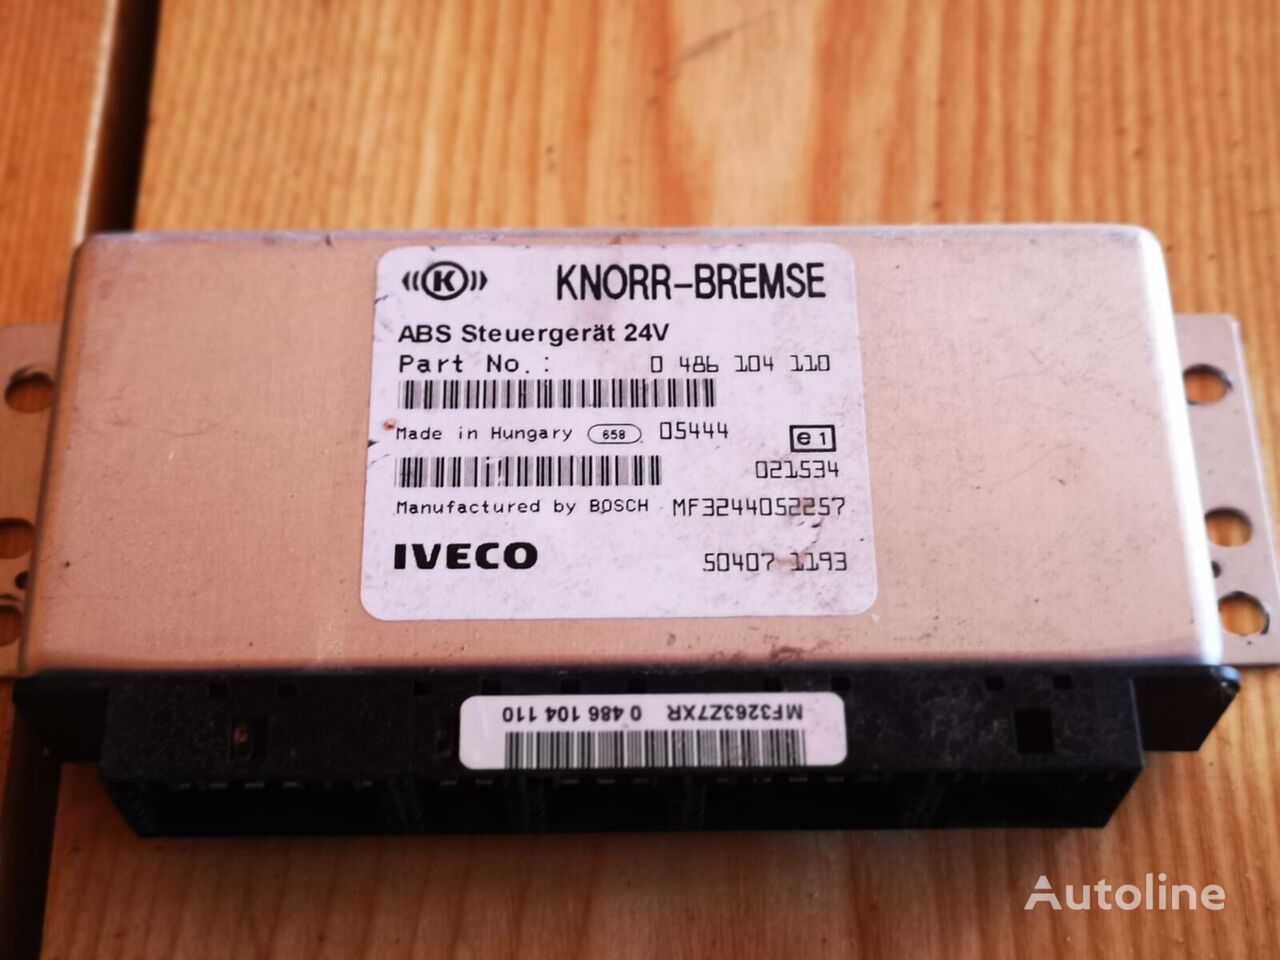 IVECO Knorr-bremse 504071193 control unit for IVECO Eurocargo , 504071193 truck